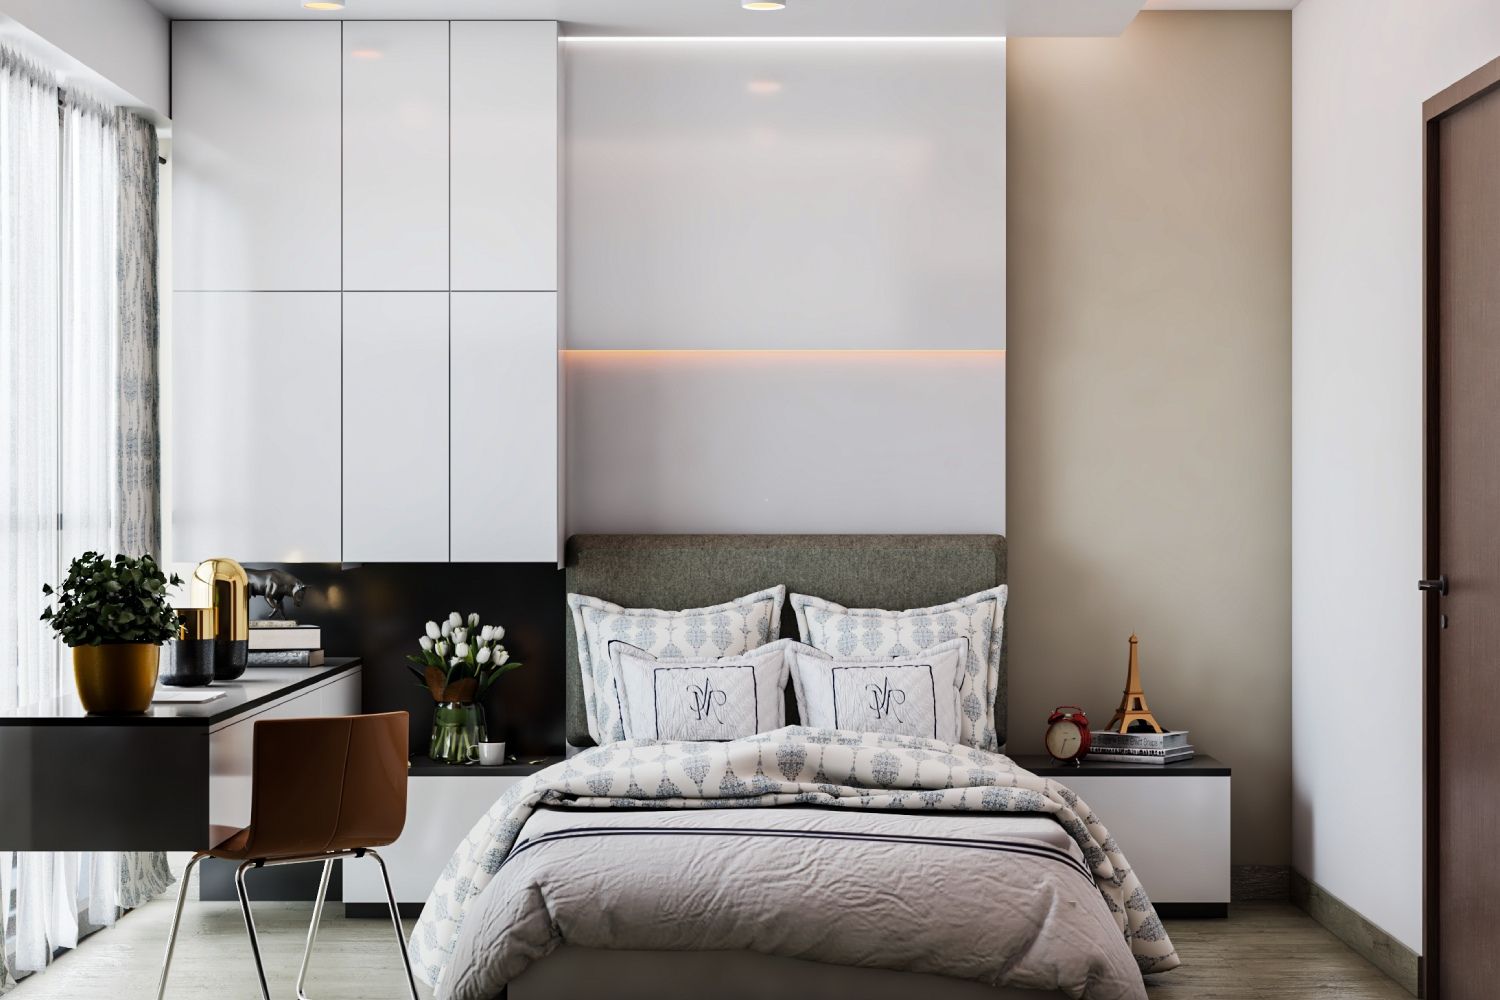 Modern Wall Design With White Panelling For Bedrooms